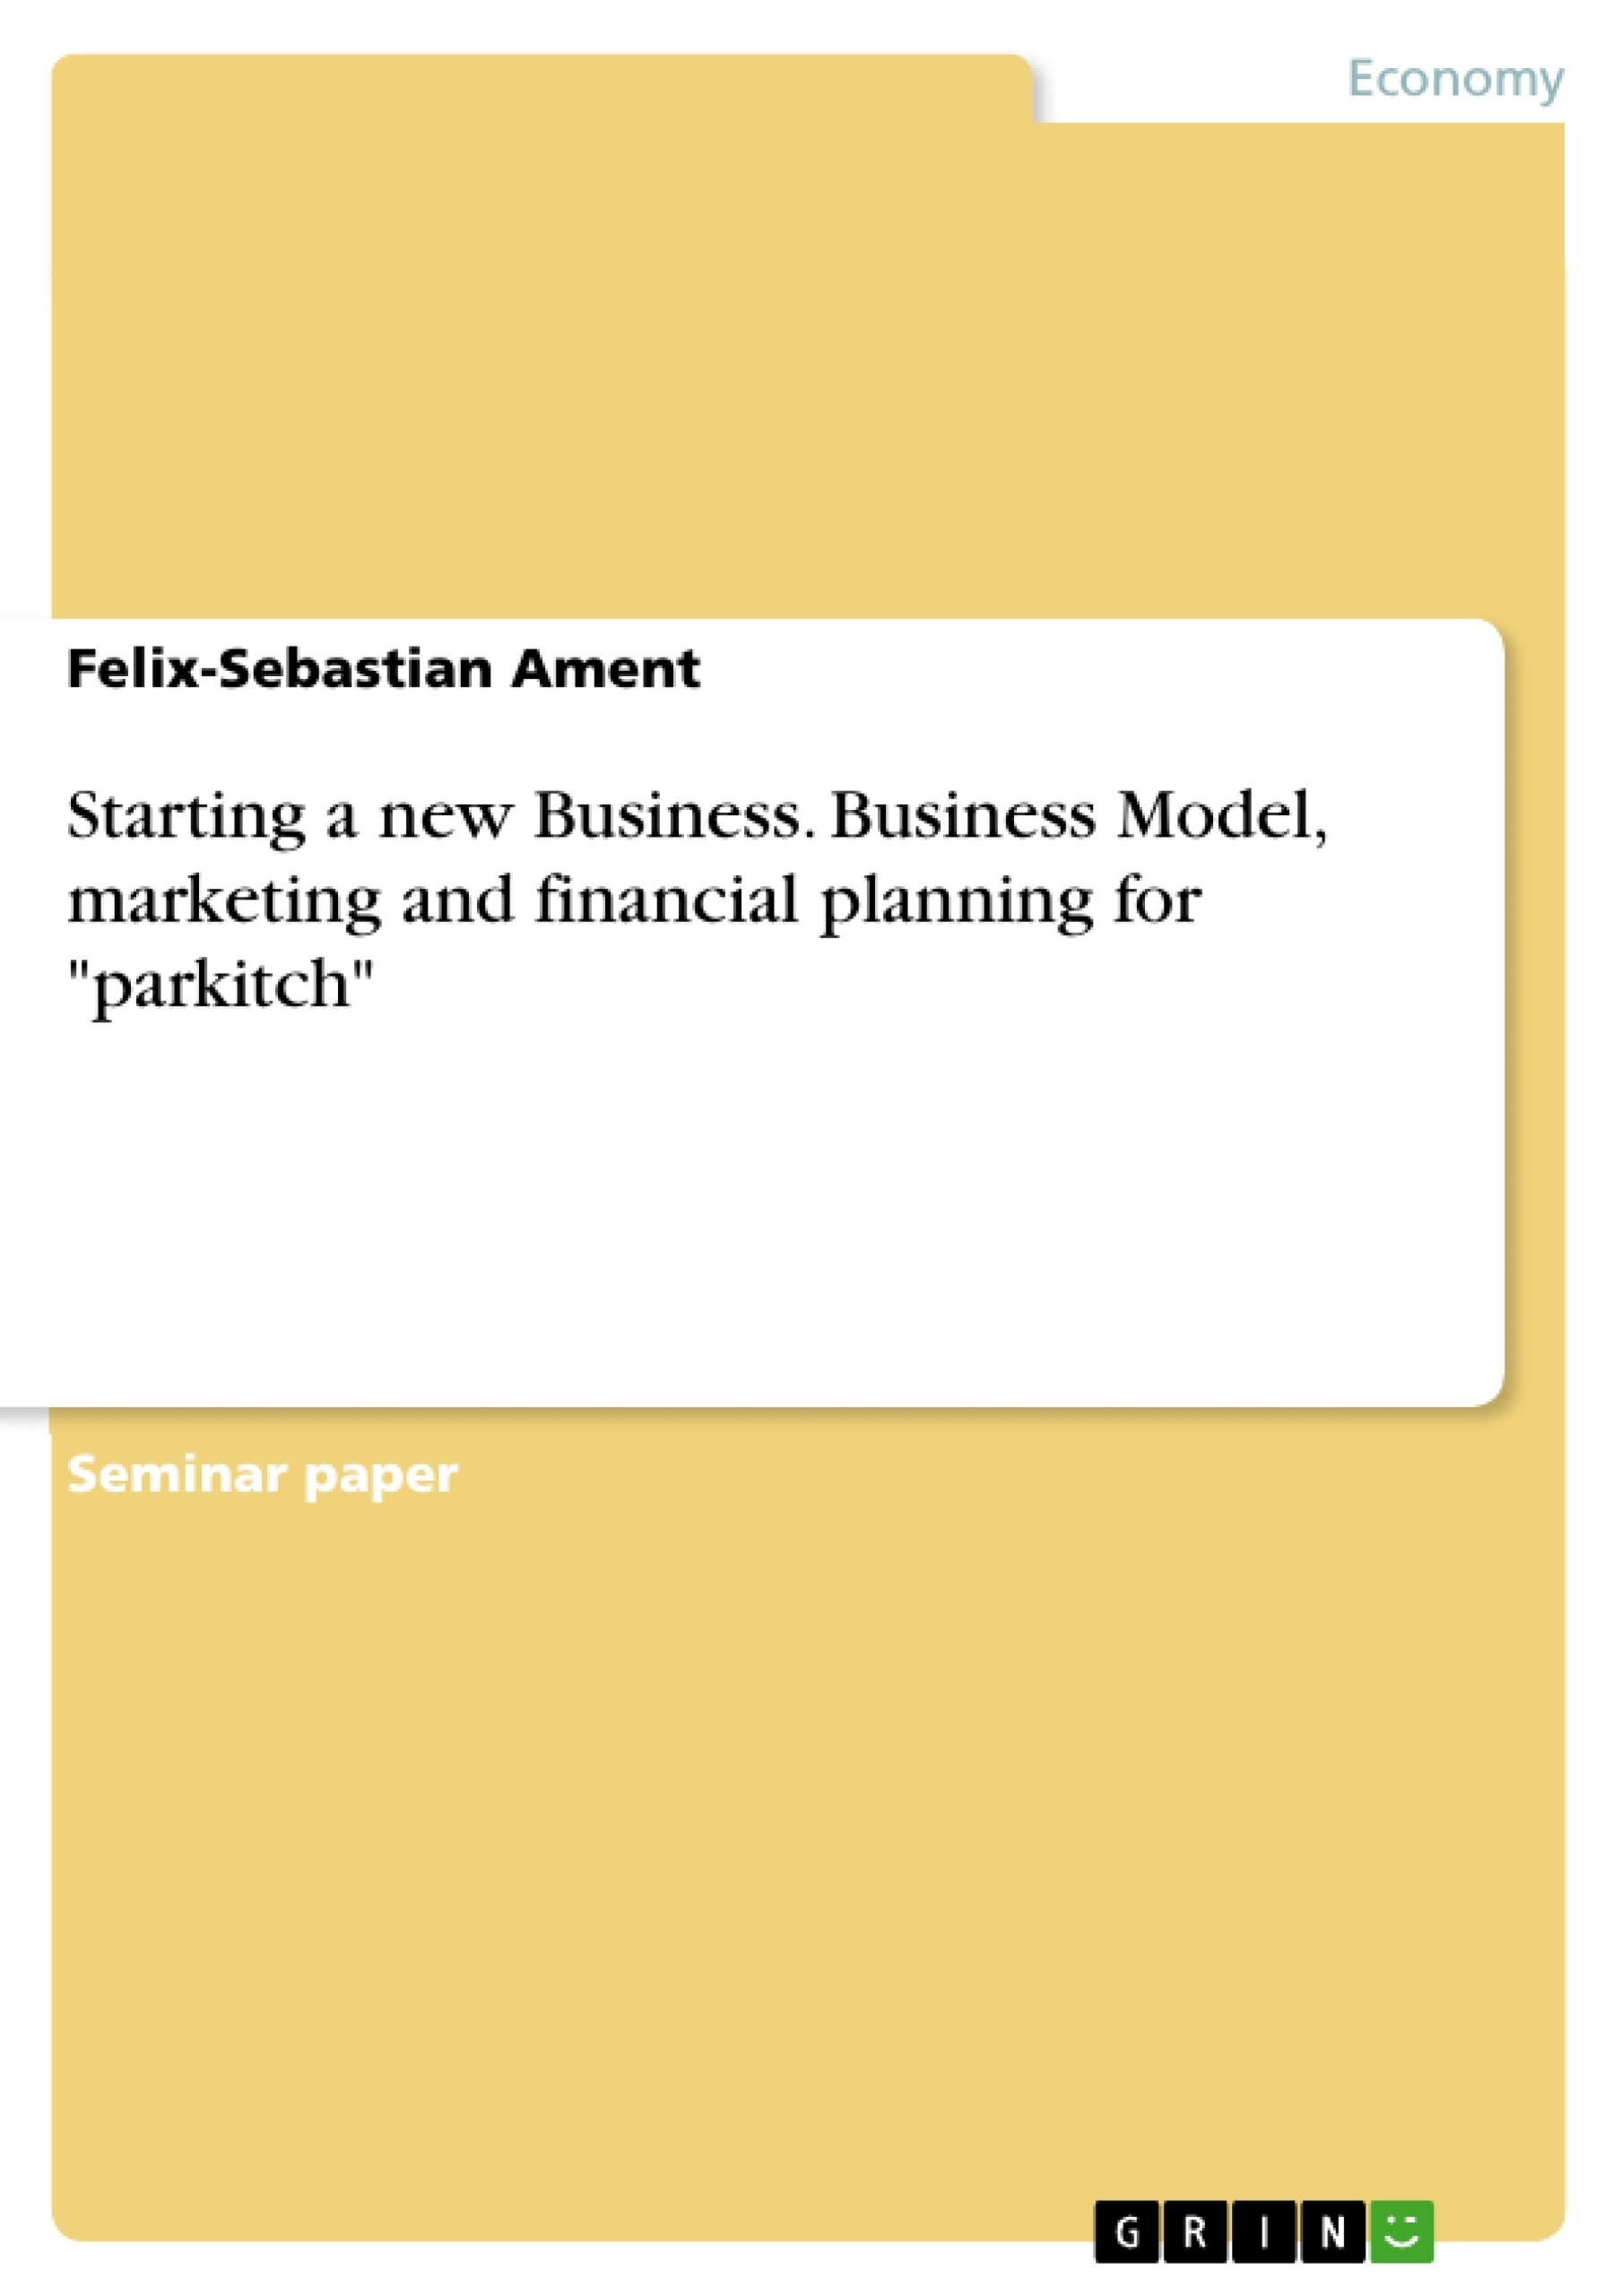 Title: Starting a new Business. Business Model, marketing and financial planning for "parkitch"